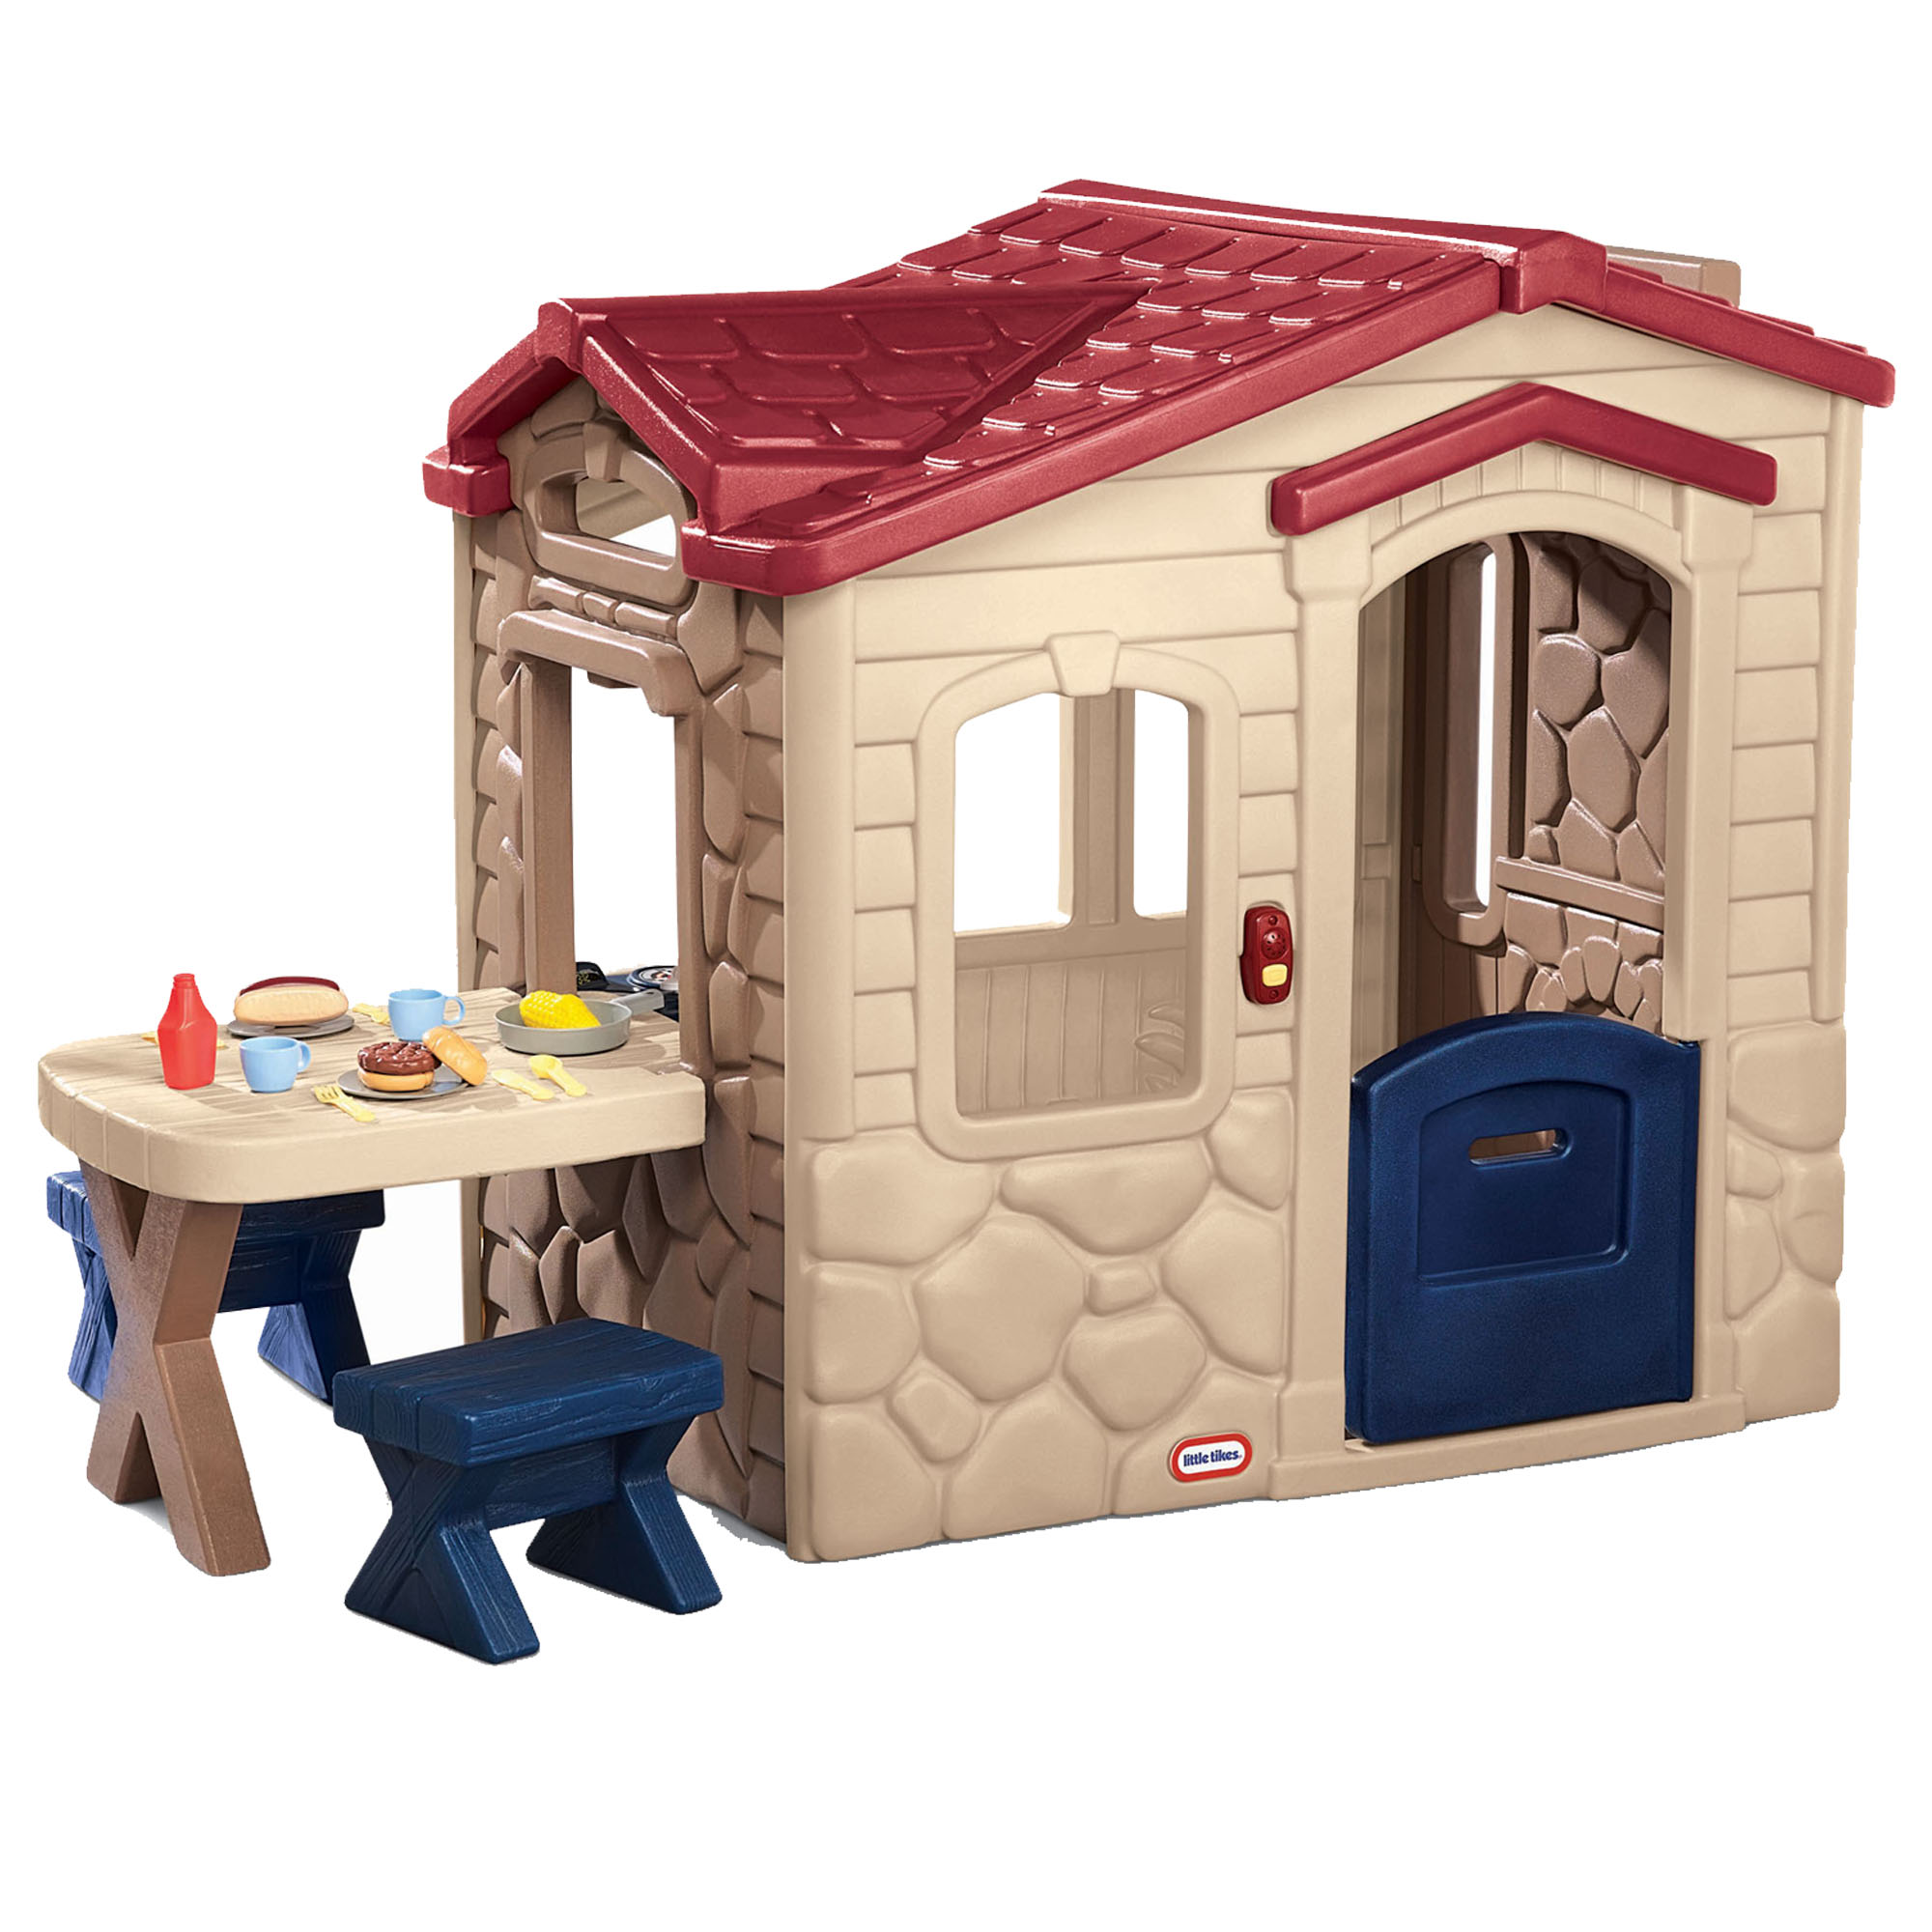 Little Tikes Picnic on the Patio Playhouse with 20 Play Accessories, Working Doorbell, Indoor and Outdoor Backyard Toy, Tan- For Kids Toddlers Boys Girls Ages 2 3 4+ Year Old - image 3 of 5